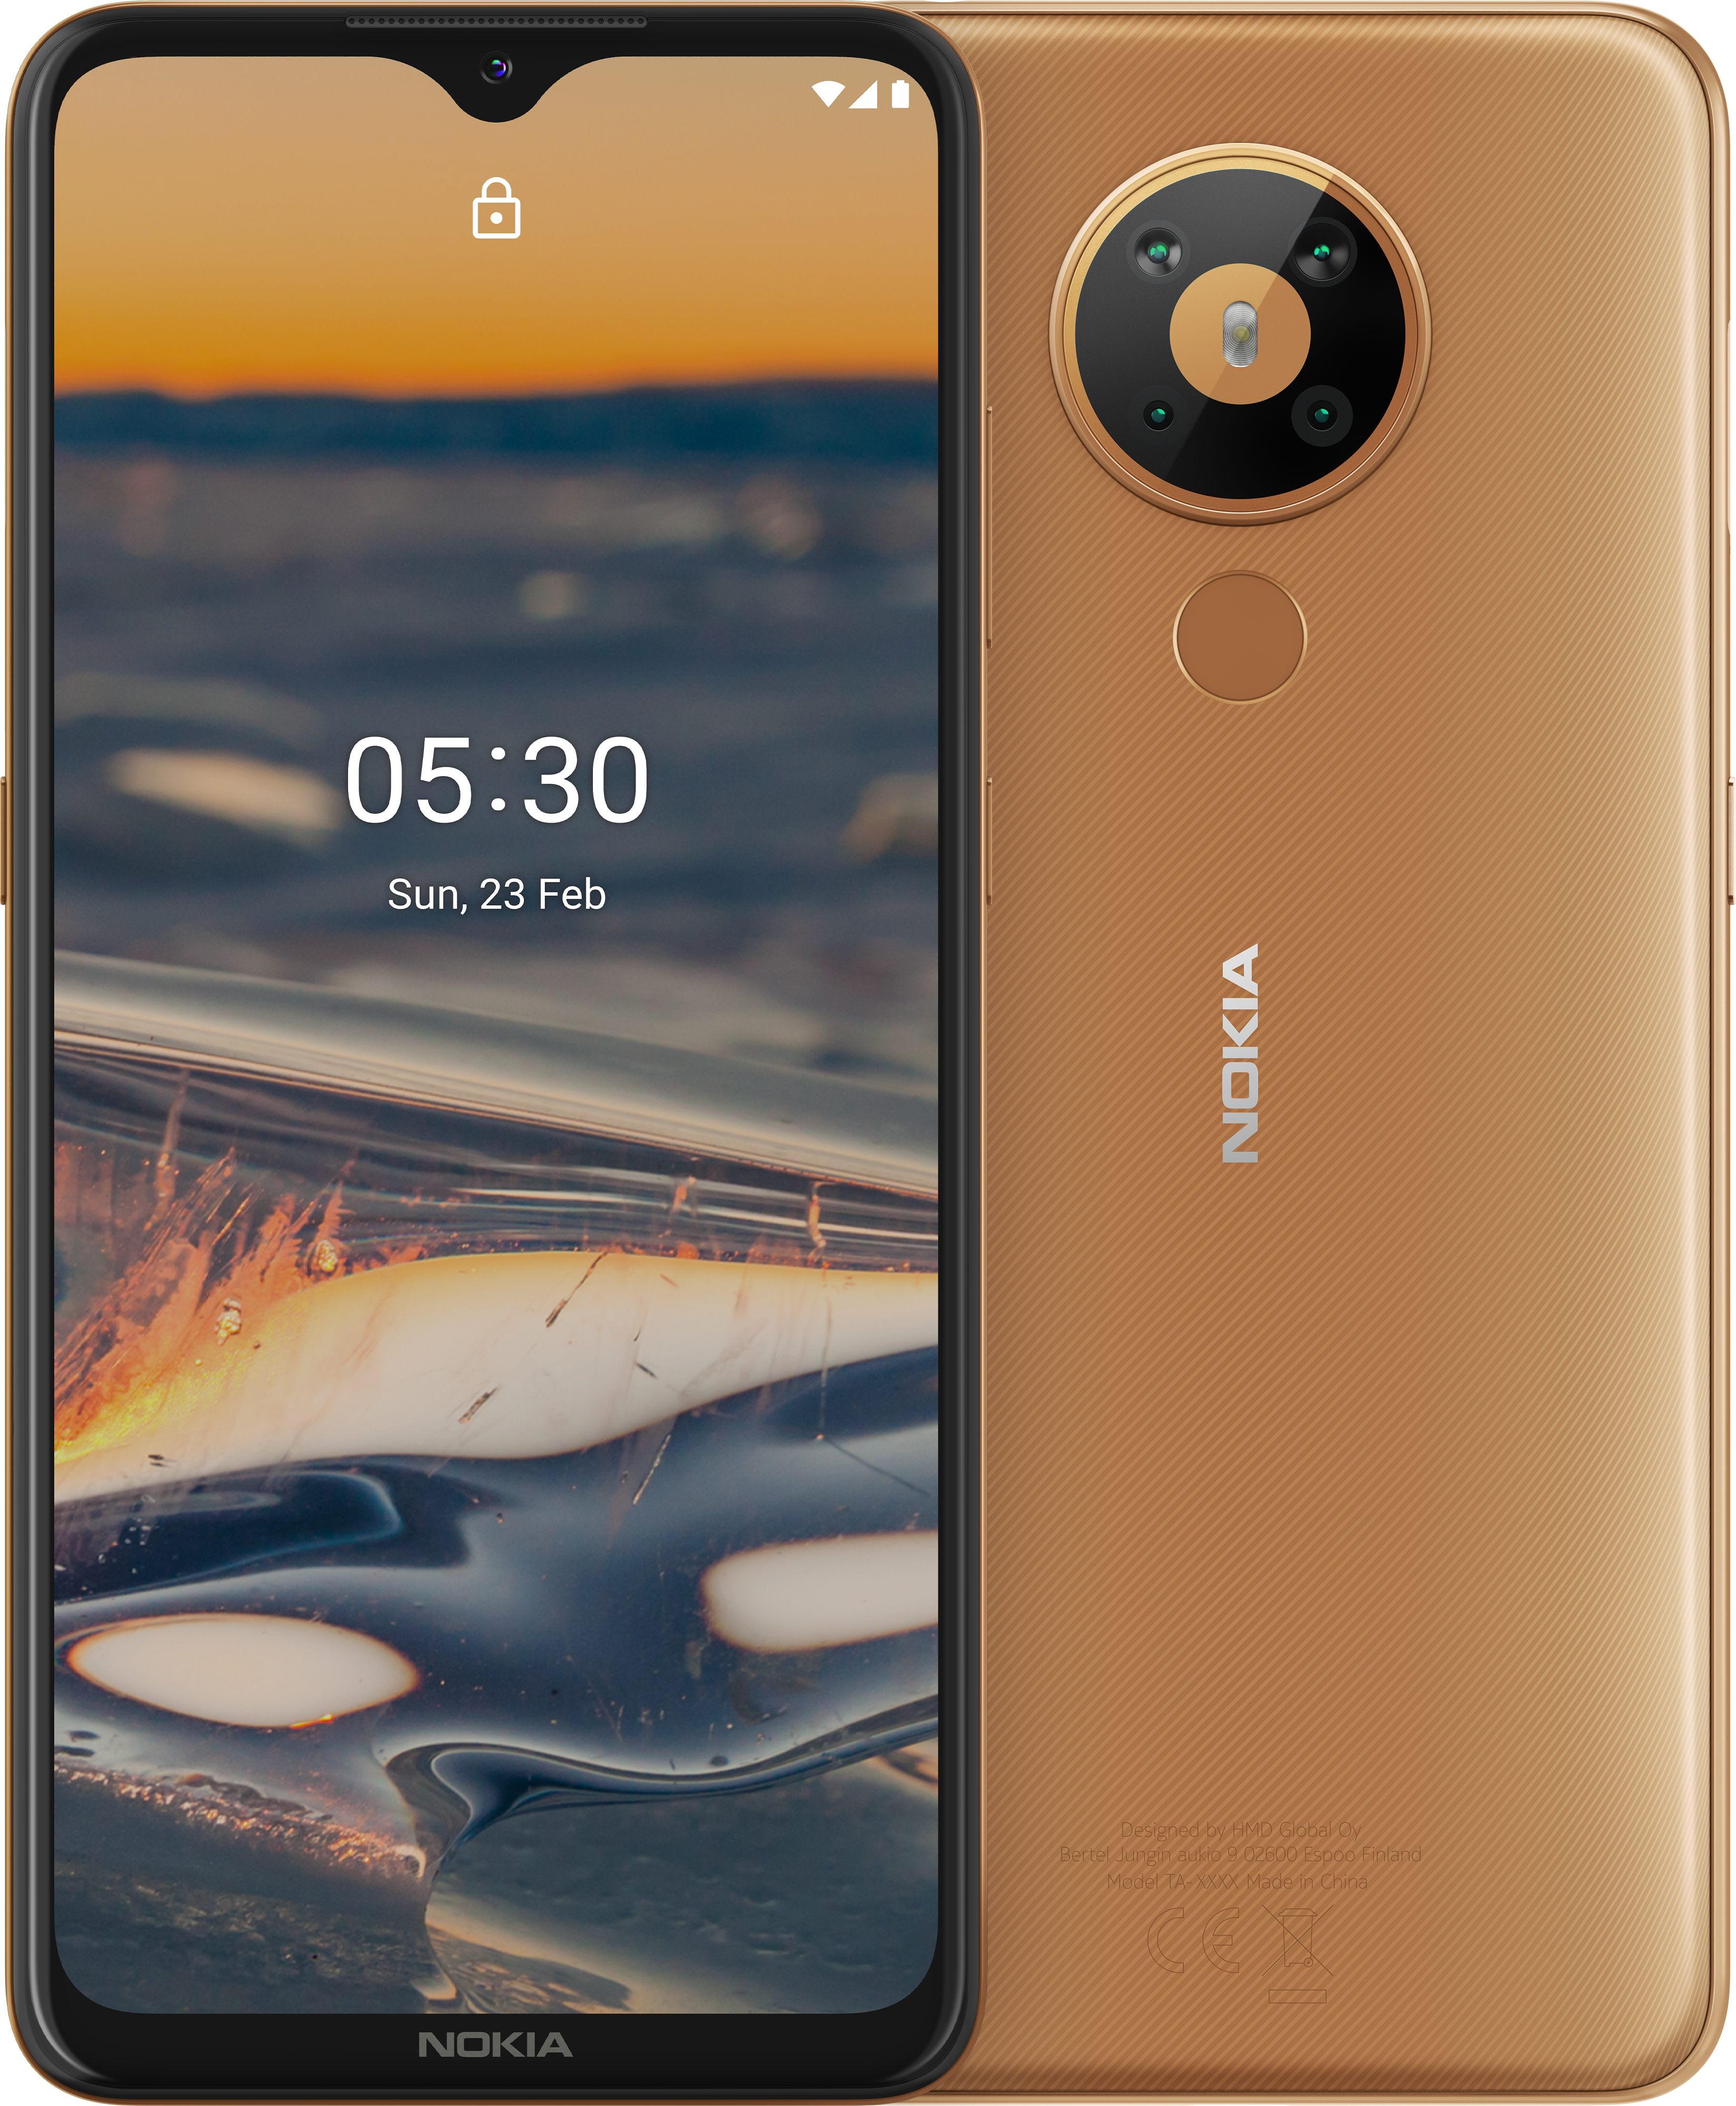 Nokia 5 3 Smartphone With Quad Camera And Large Hd Display